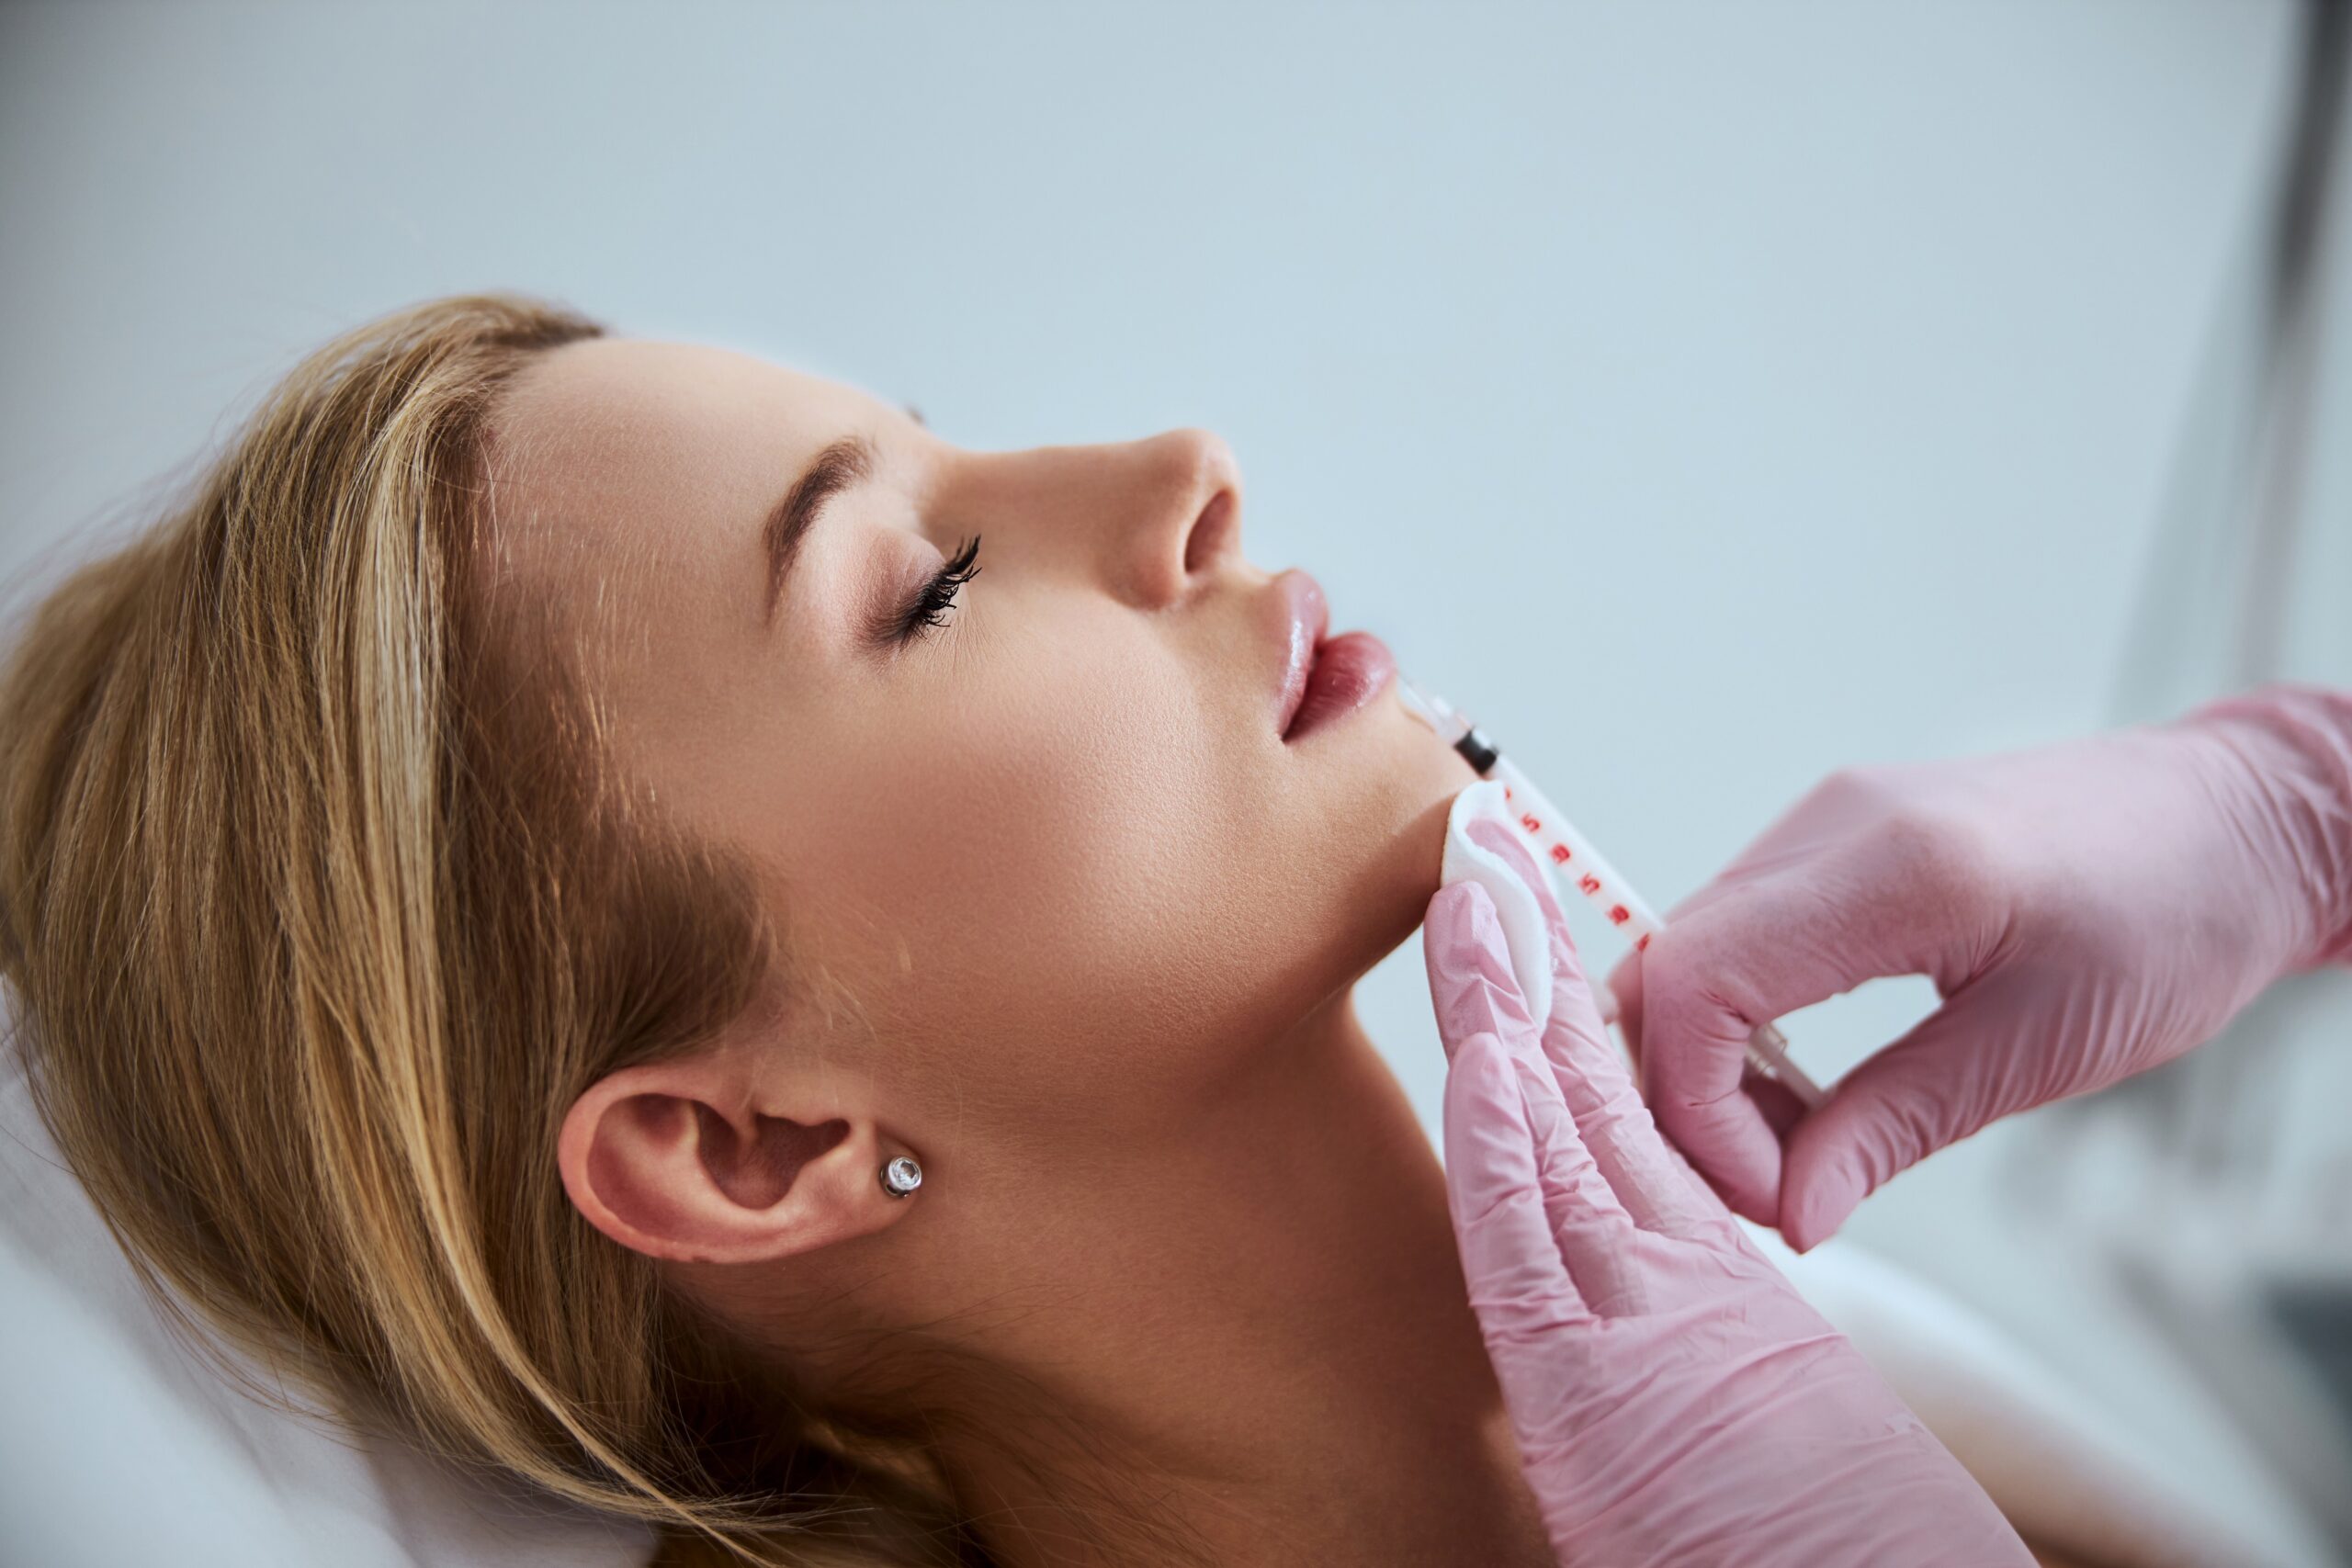 Can My Dentist Administer Cosmetic and Dermal Fillers?